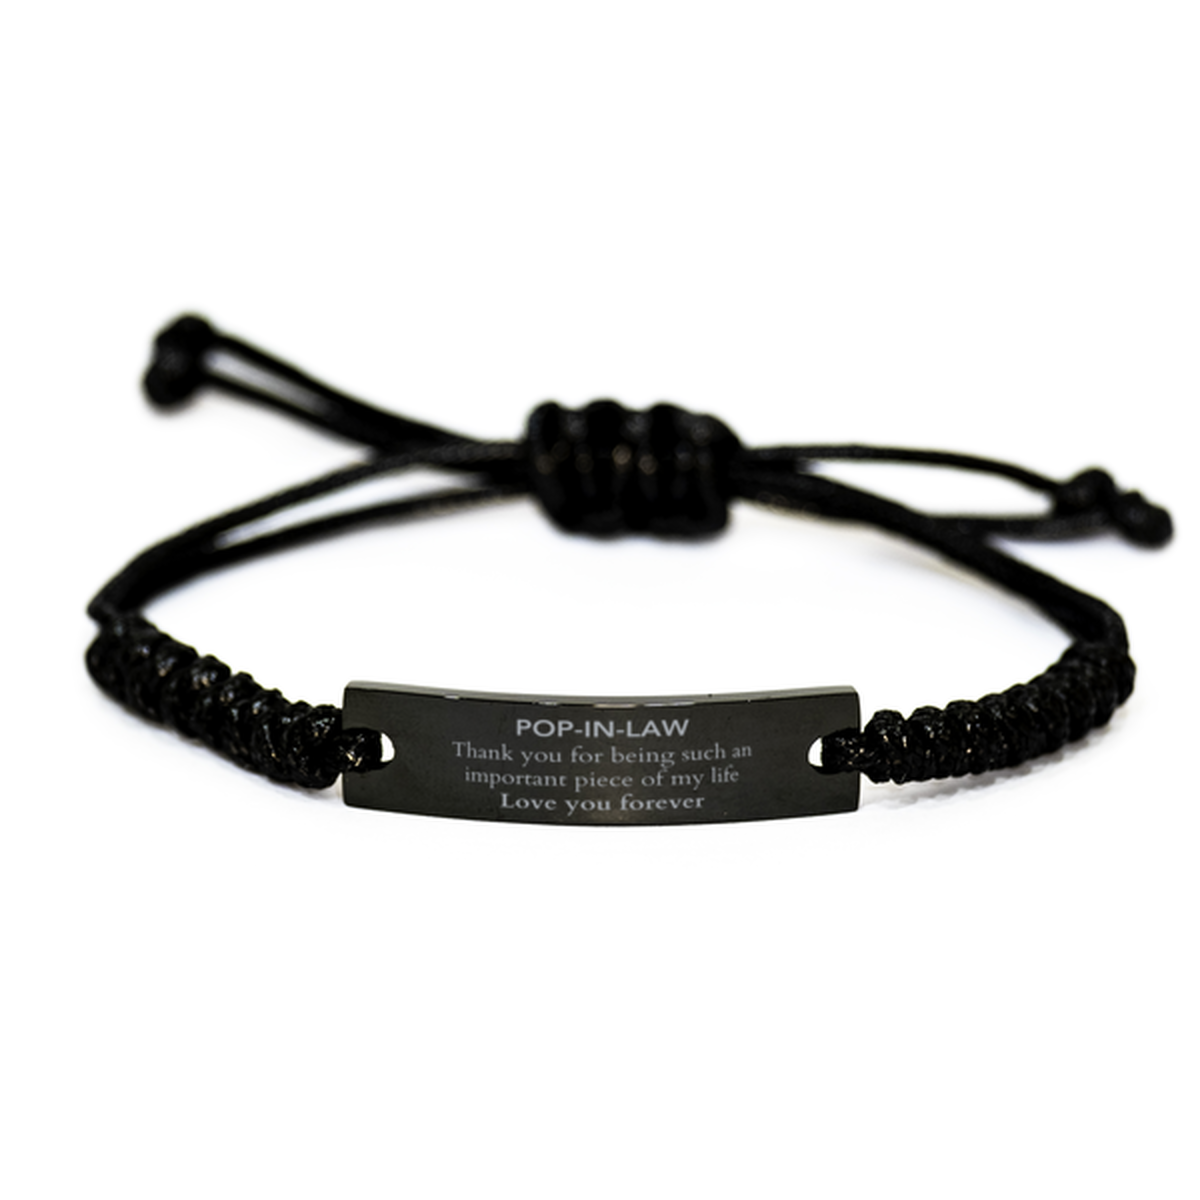 Appropriate Pop-in-law Black Rope Bracelet Epic Birthday Gifts for Pop-in-law Thank you for being such an important piece of my life Pop-in-law Christmas Mothers Fathers Day